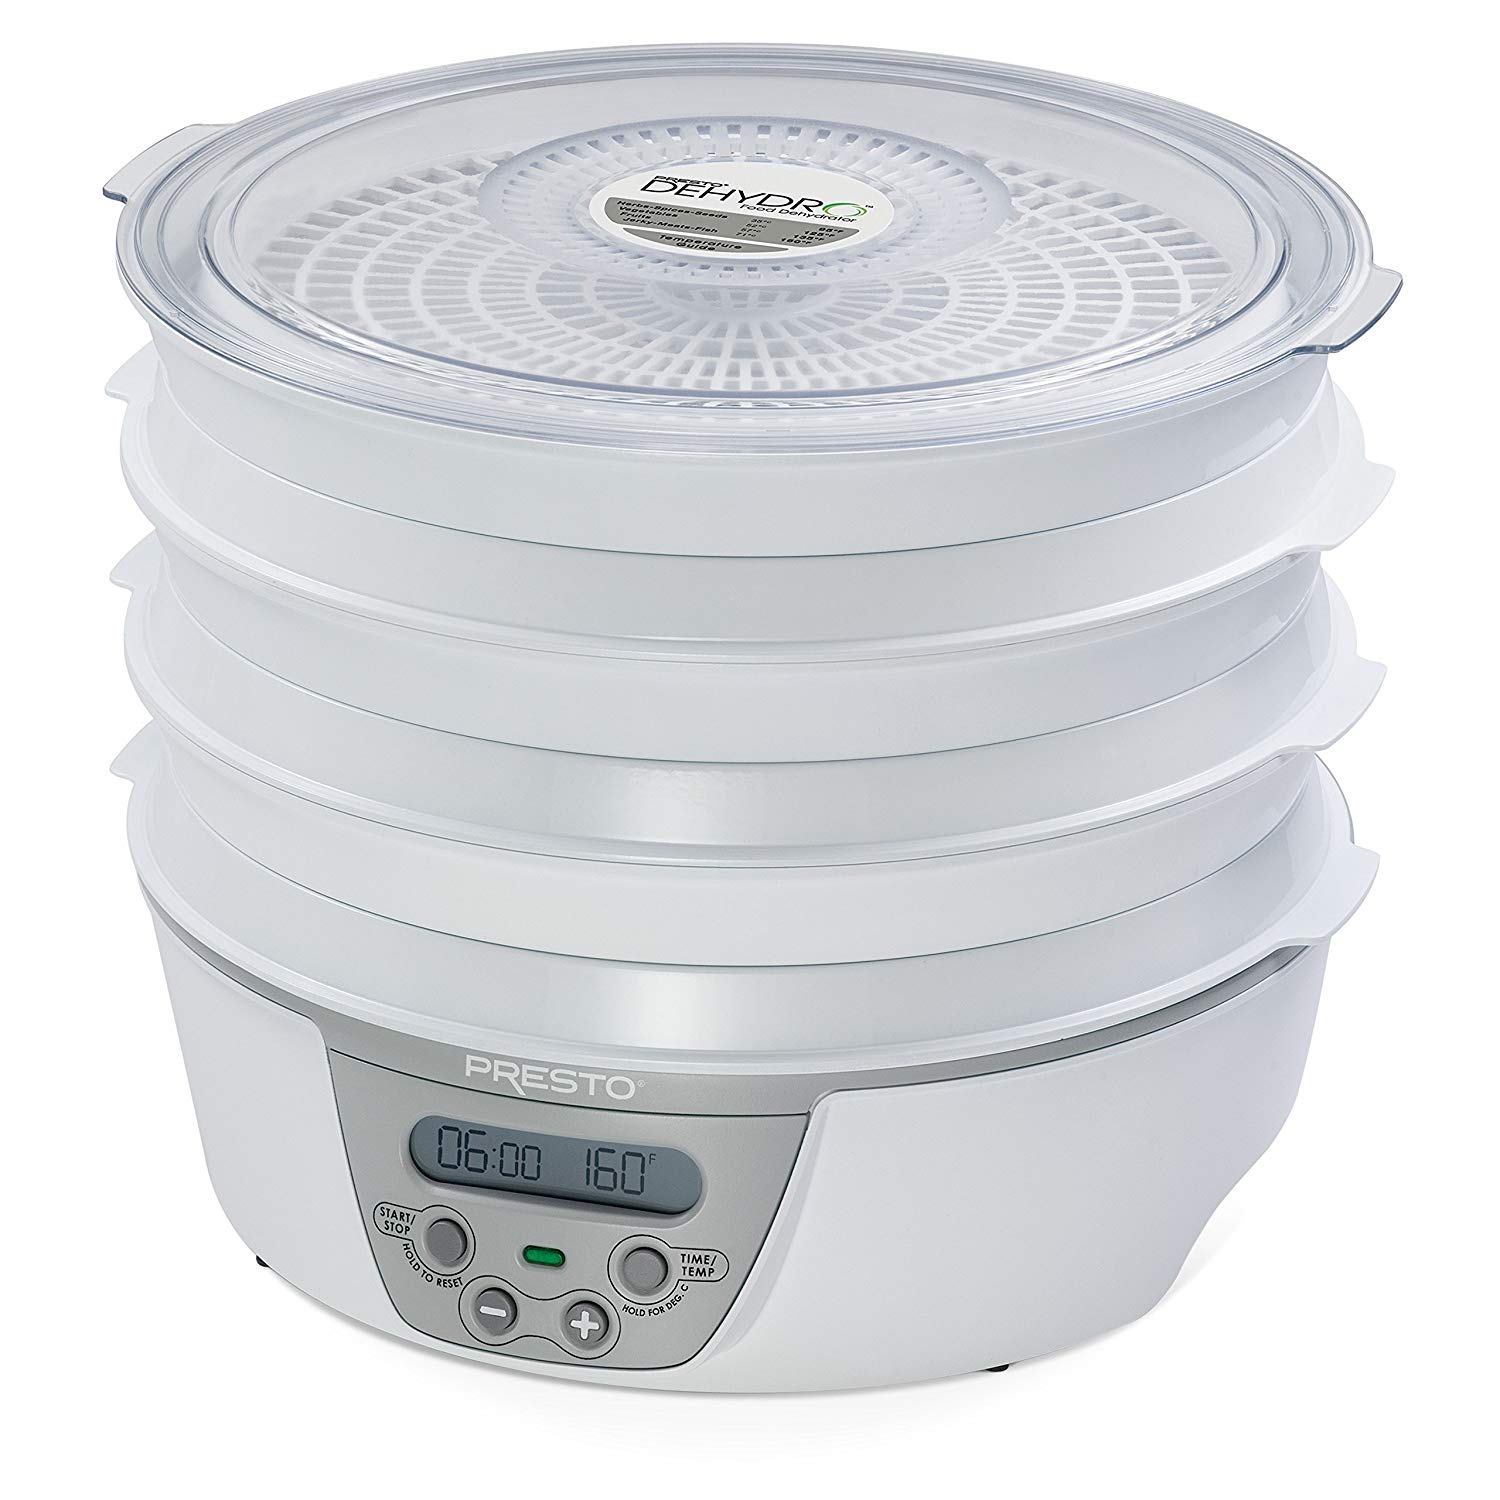 You are currently viewing Presto Dehydro Digital Electric Food Dehydrator 06301